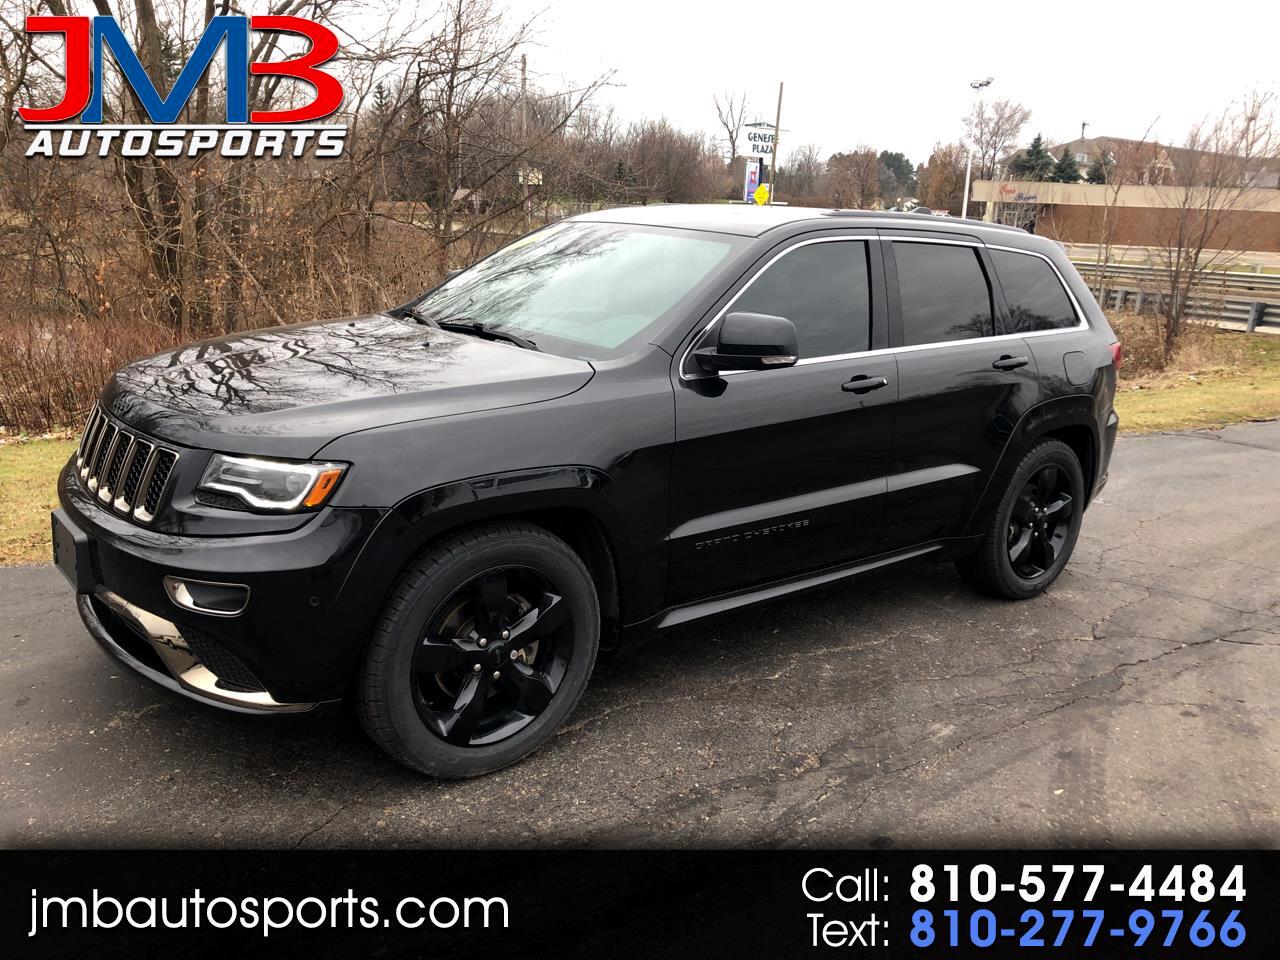 Used 2016 Jeep Grand Cherokee 4wd 4dr High Altitude For Sale